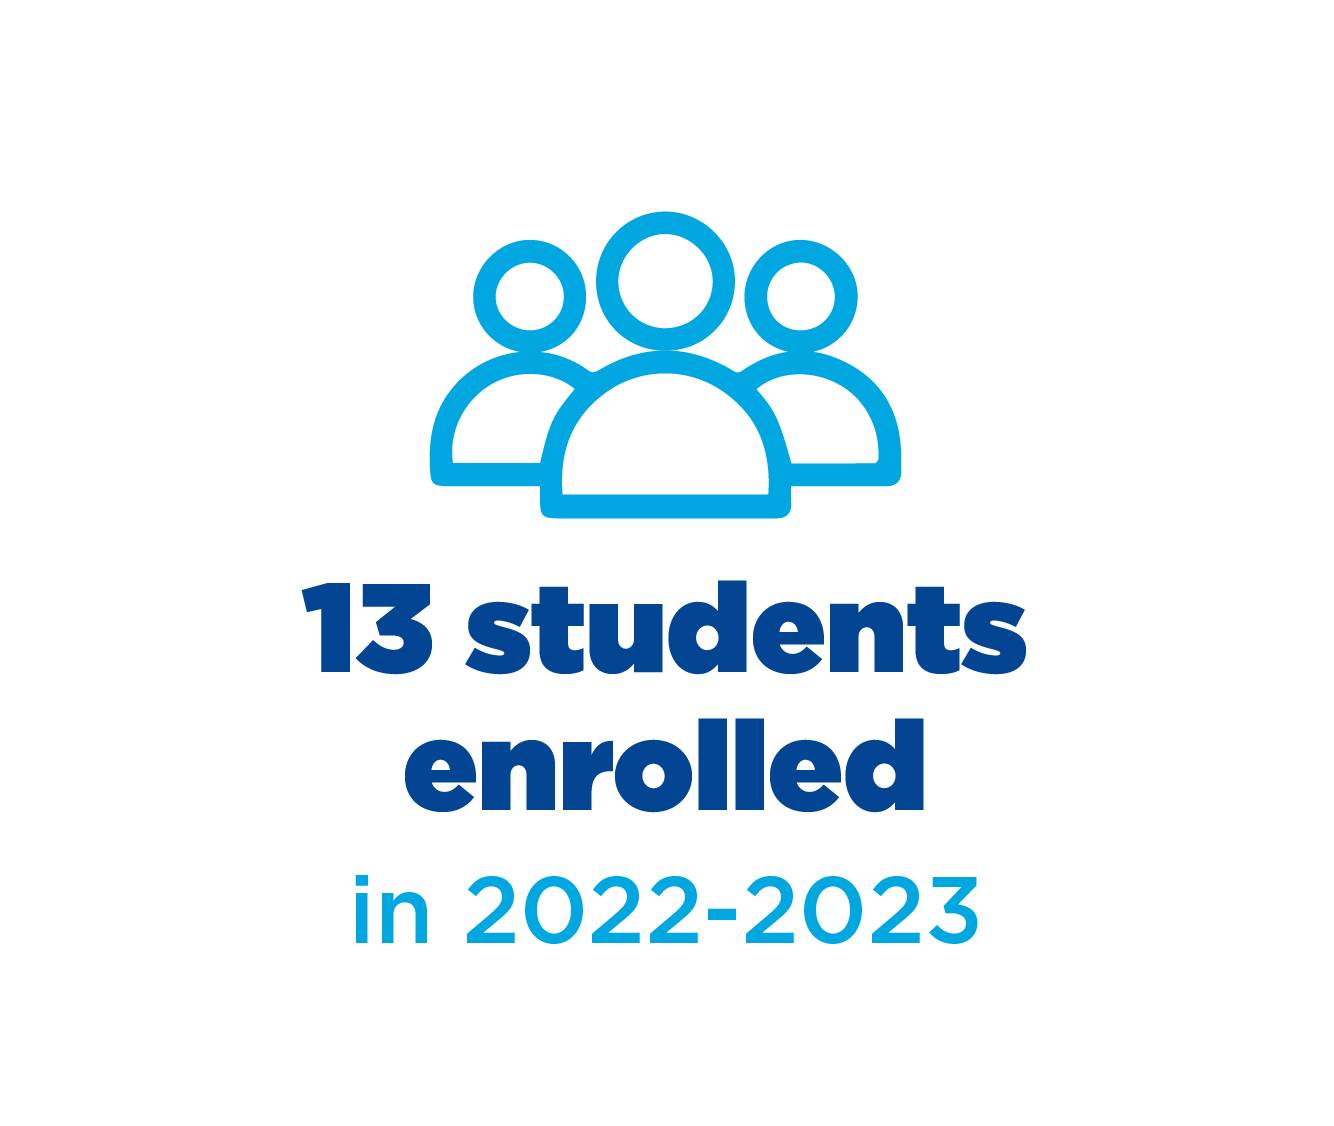 13 students enrolled in 2022-2023